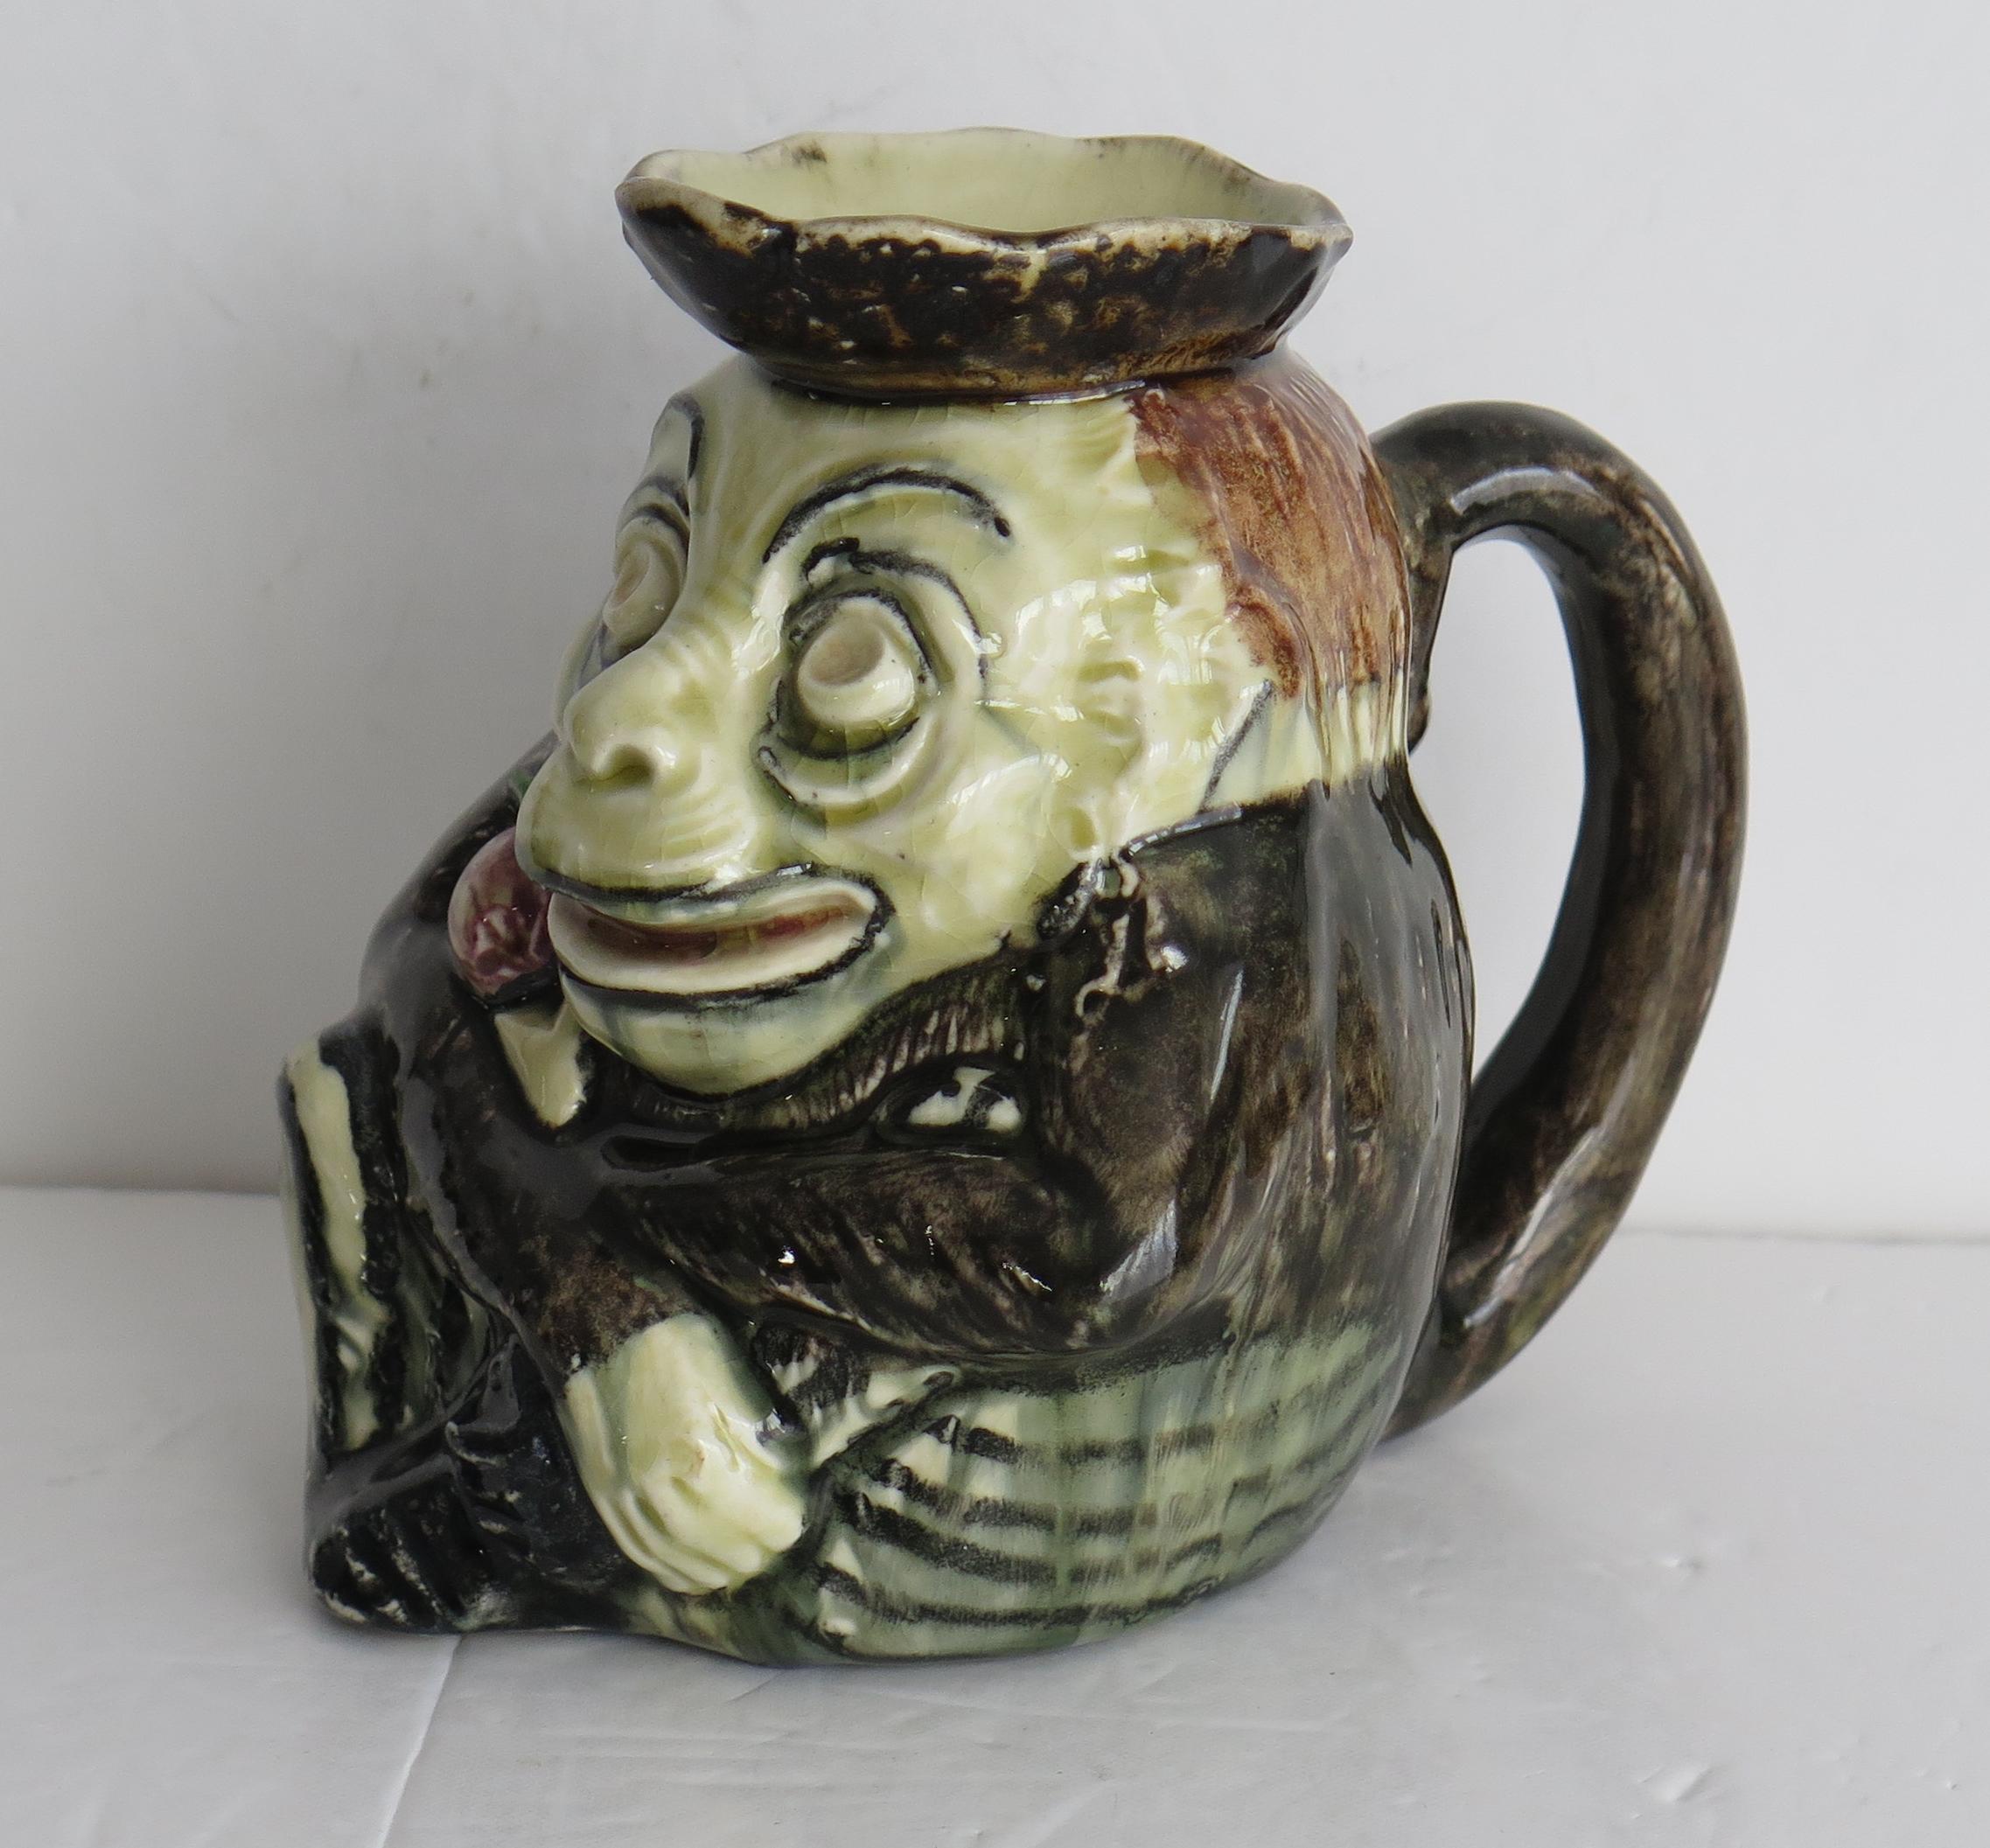 Other Antique Hand-Painted Grotesque Pottery Jug, Circa 1890